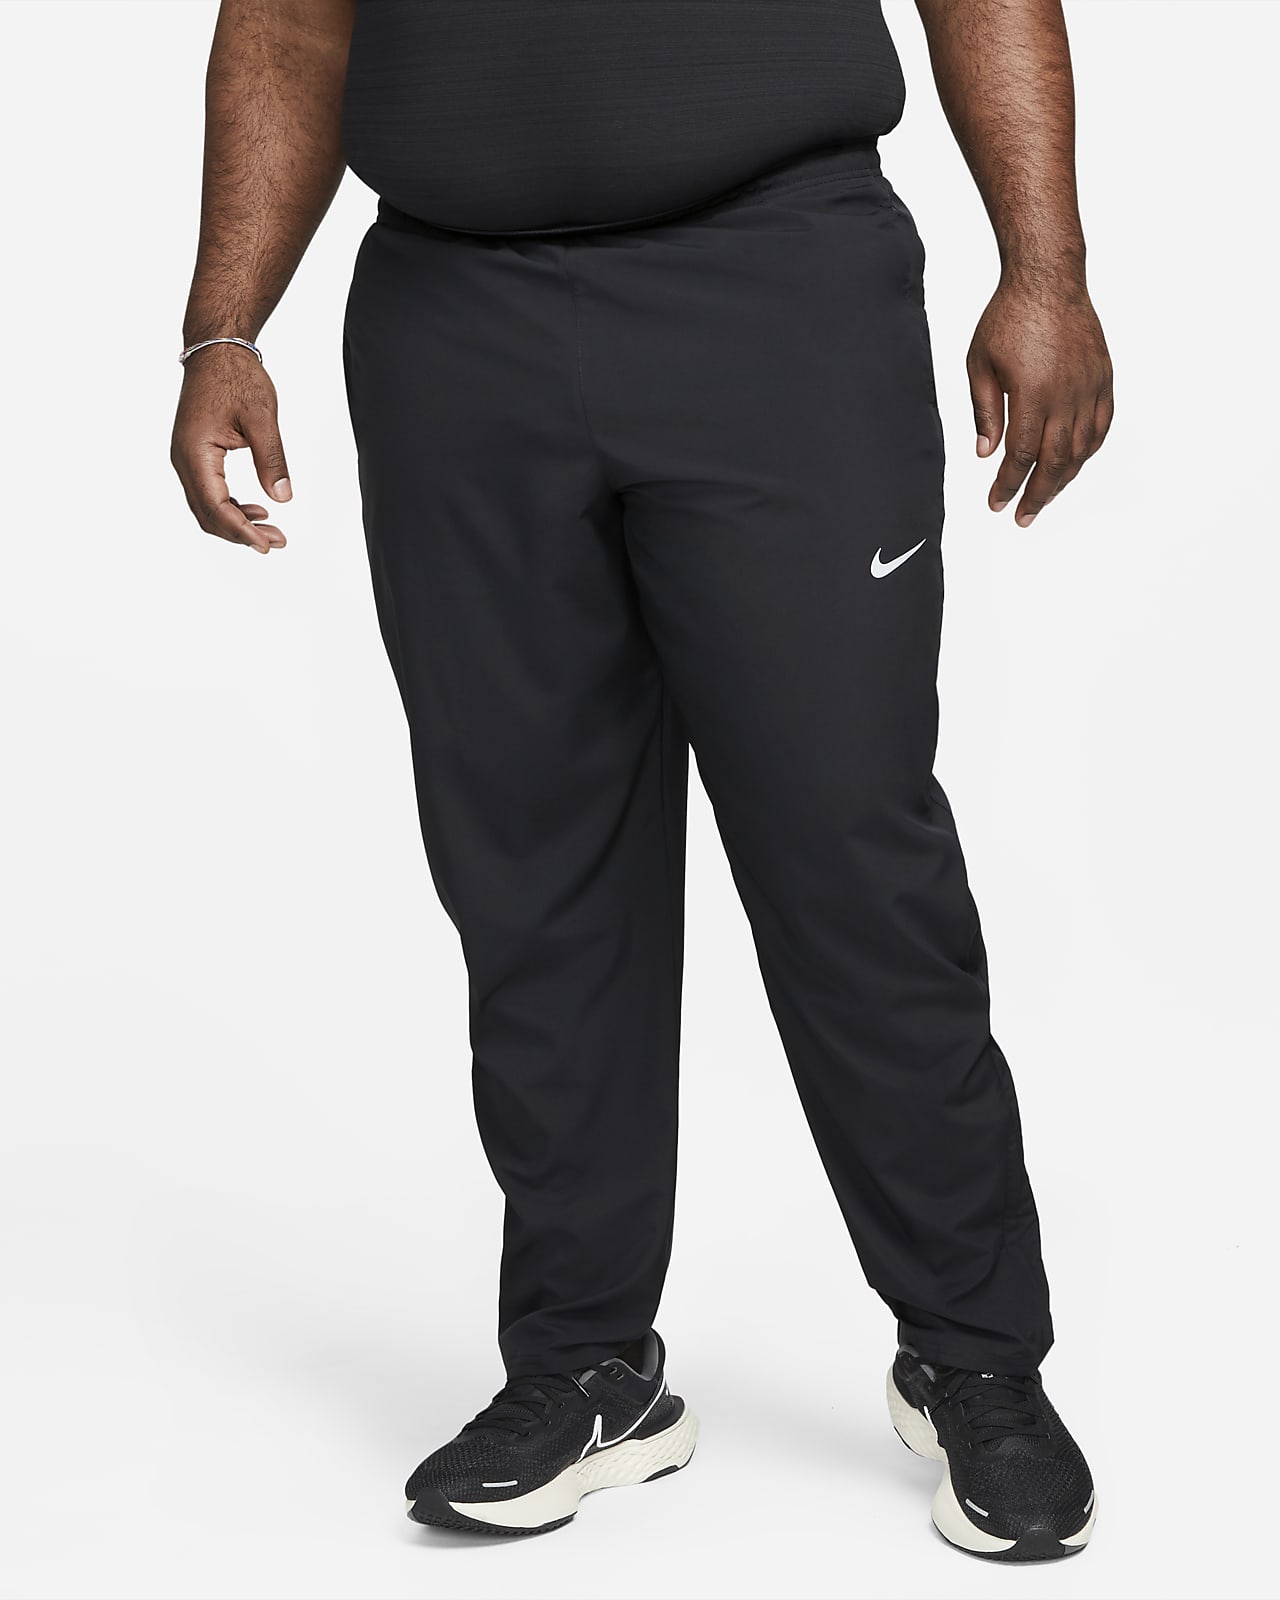 Nike Big Swoosh Jogger Black, White & Grey Heather | END. | Sporty outfits,  Nike clothes mens, Hype clothing